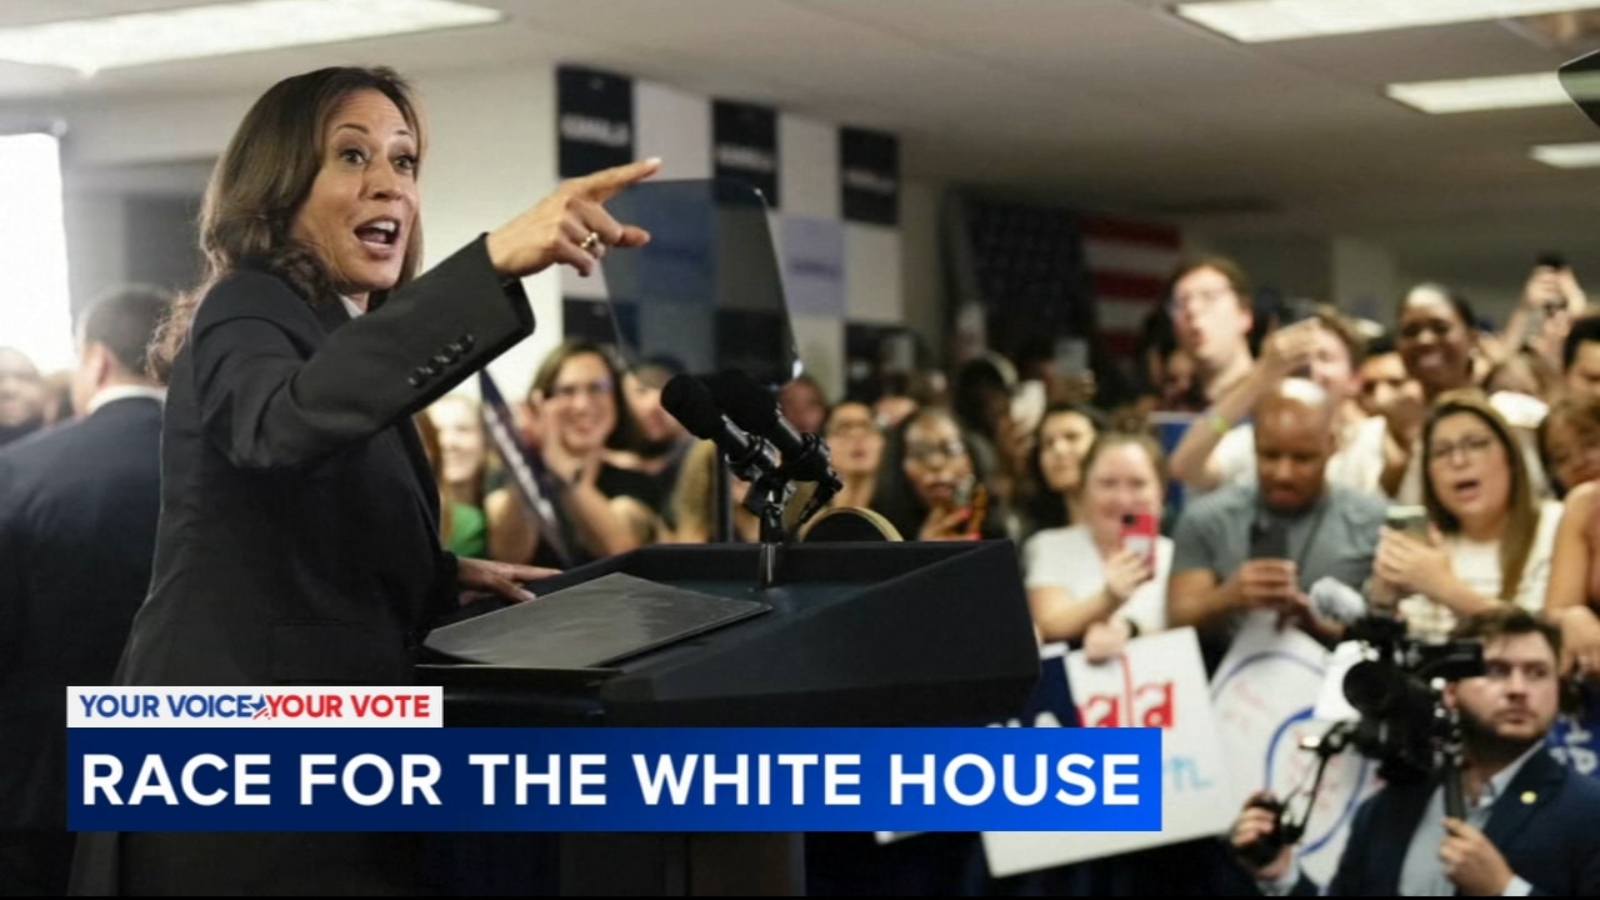 Labor unions start to unify behind Kamala Harris. Here’s why. [Video]